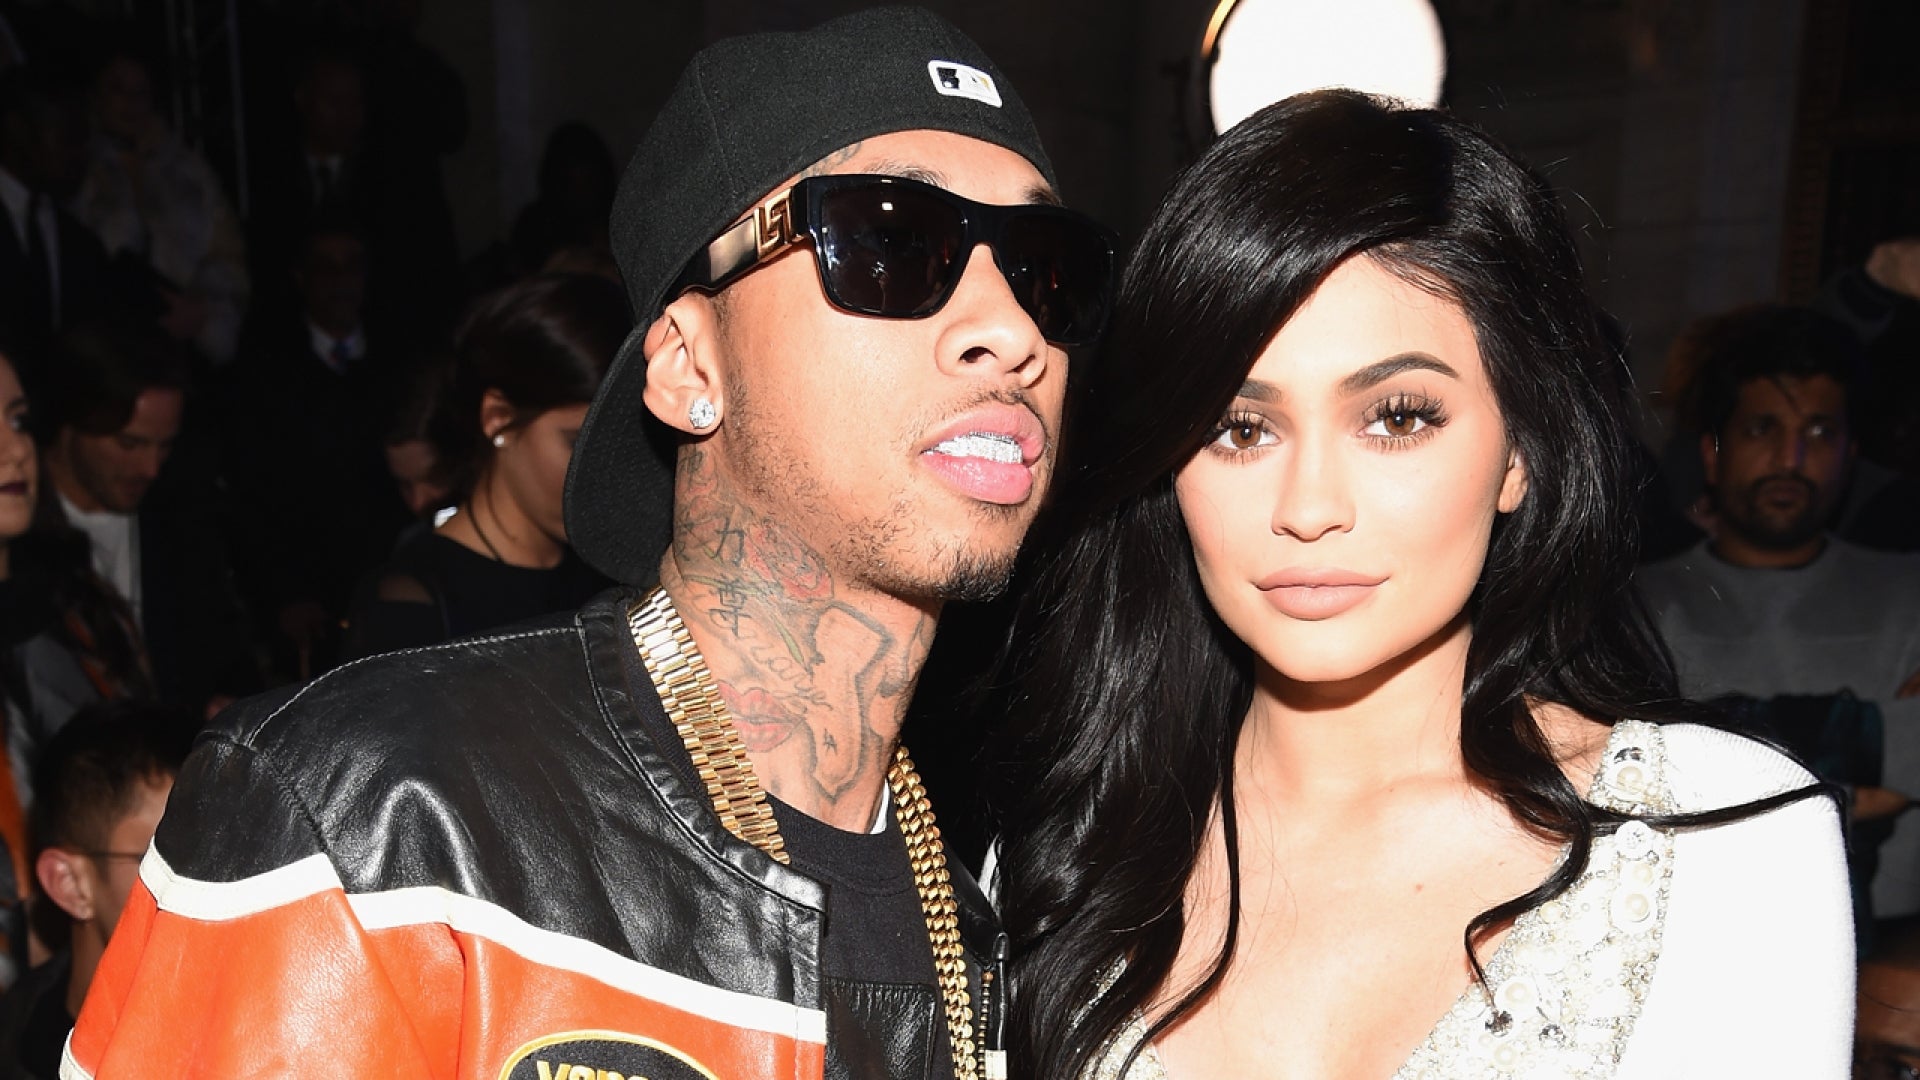 Kylie Jenner and Tyga Pack on the PDA at the Gym